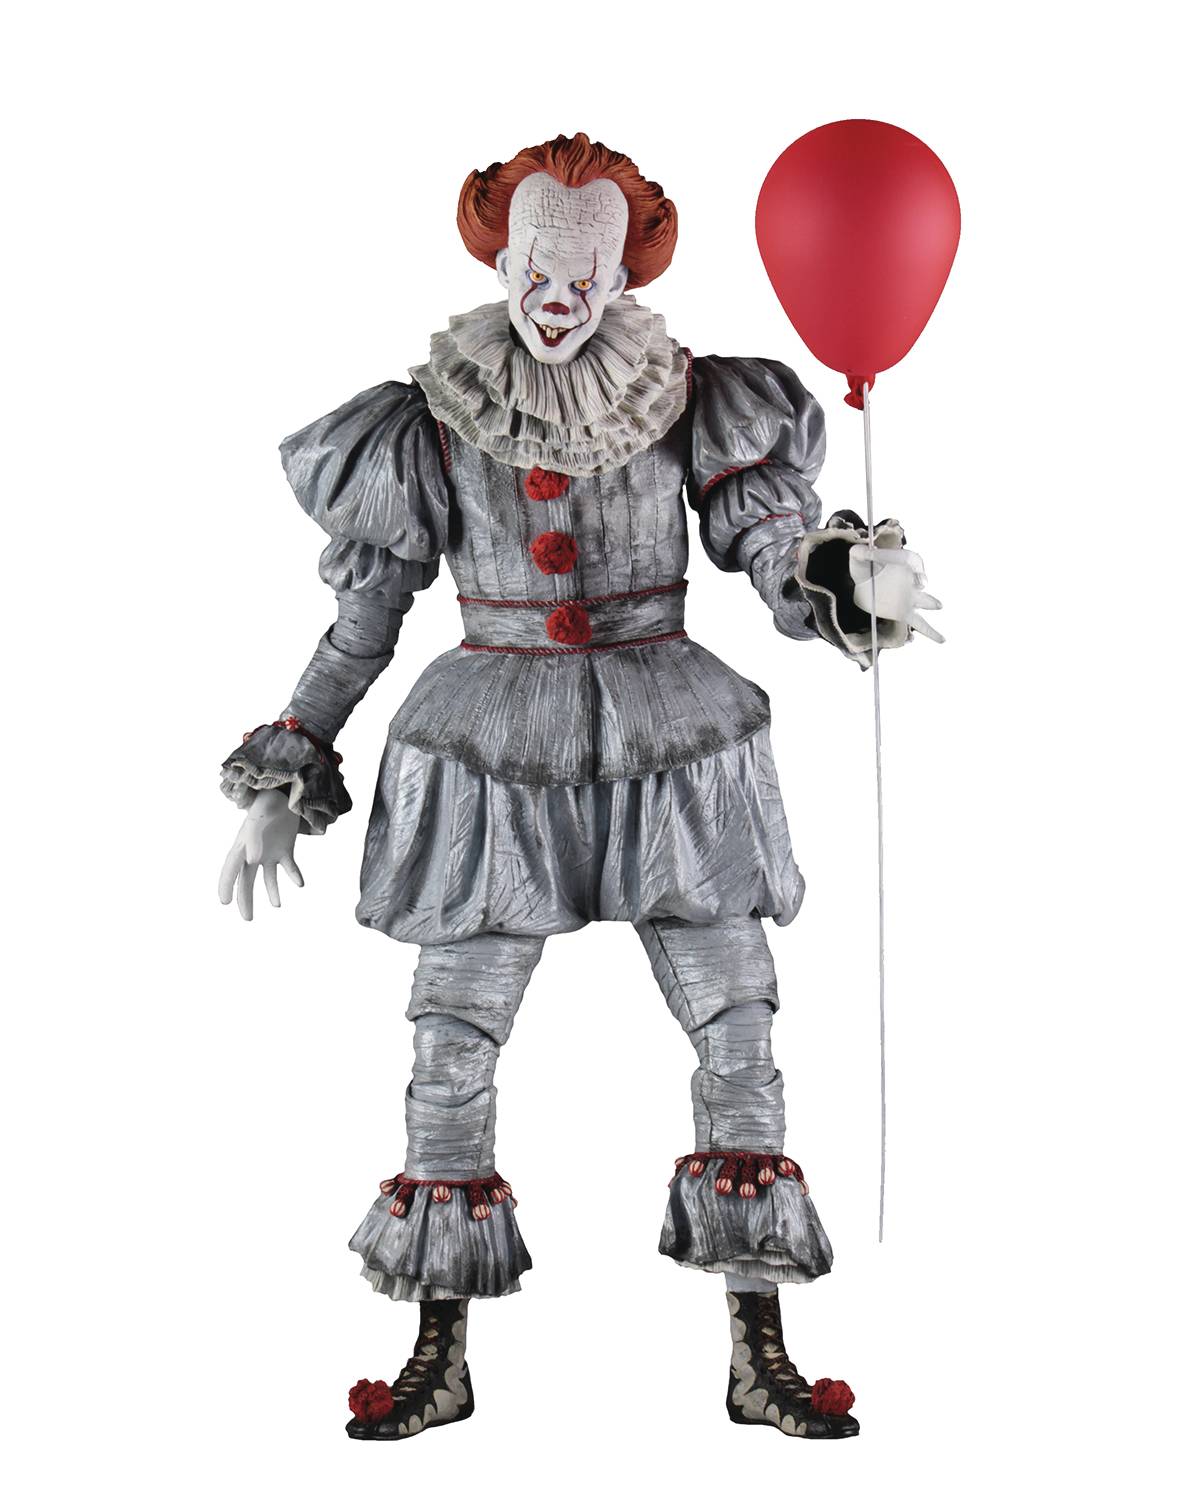 IT 2017 Pennywise 1/4 Scale Figure - Silver Snail